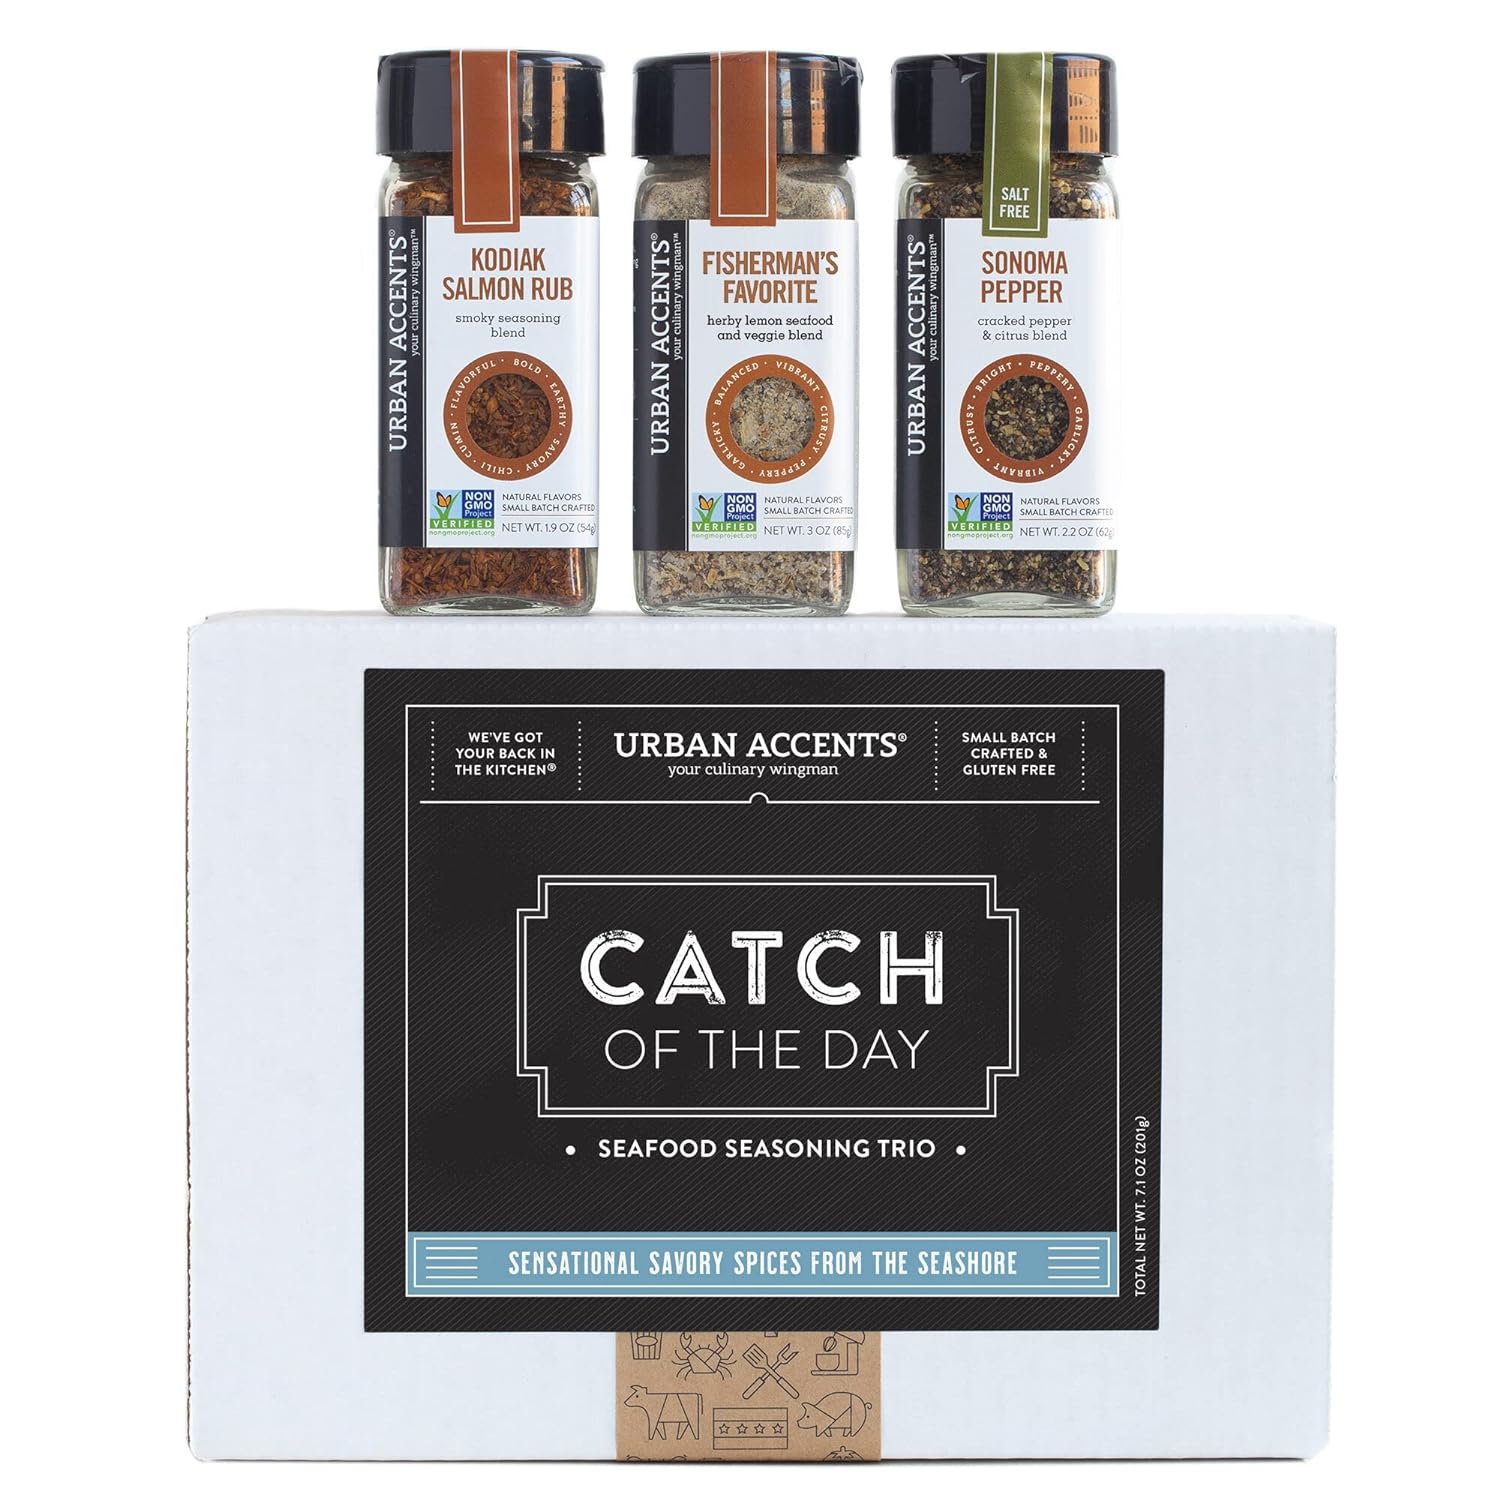 Urban Accents CATCH OF THE DAY, Seafood Seasoning Gift Set (Set of 3) - Ultimate Fish Seasoning Set for Seafood, Meat and even Veggies- The Gift for Any Occasion